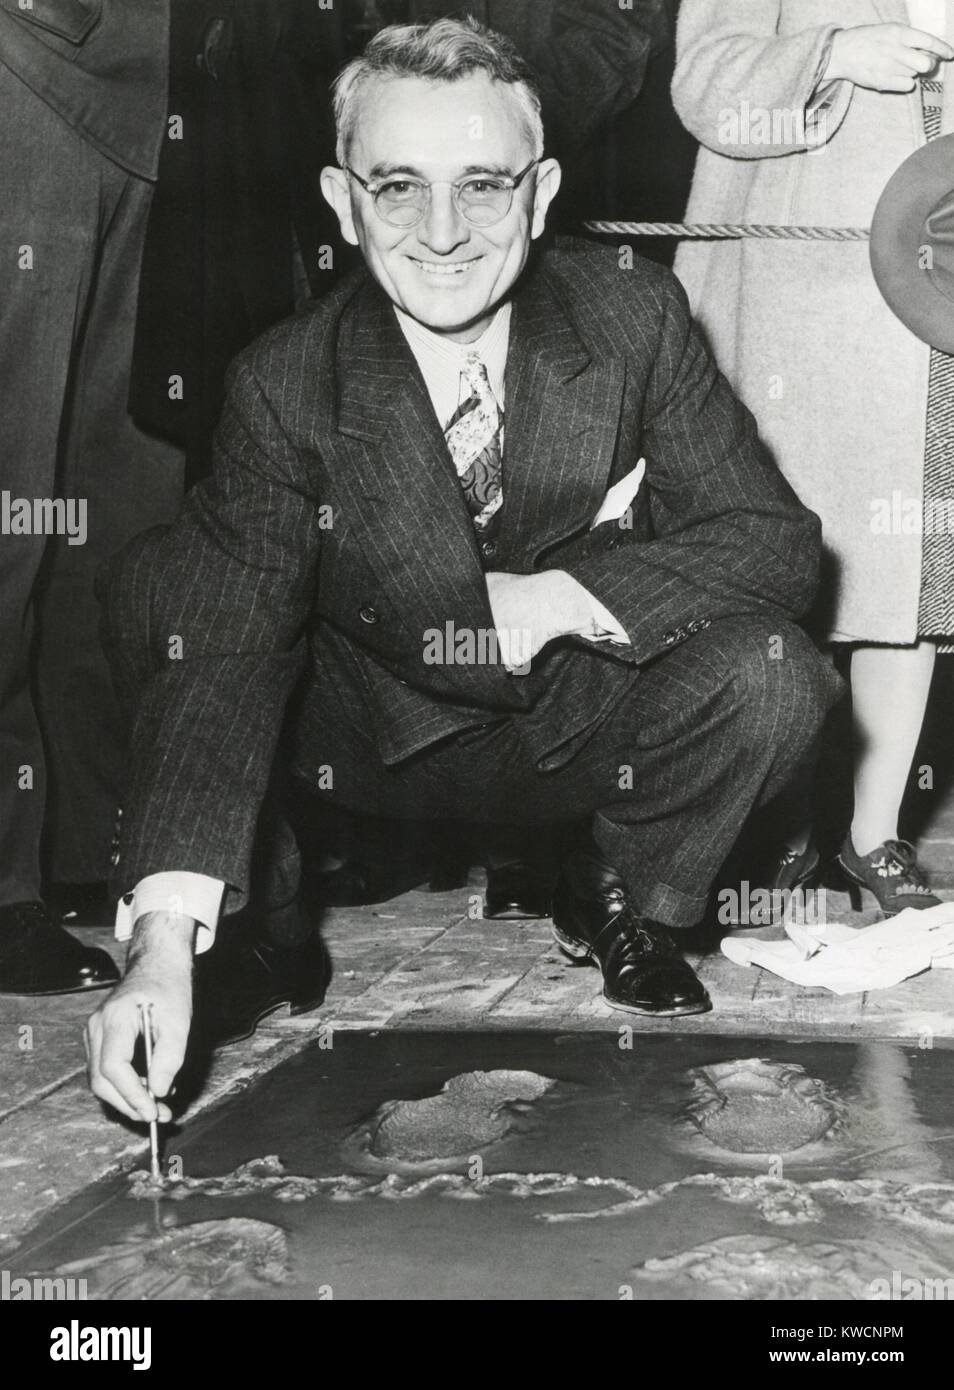 Dale Carnegie, signing his concrete slab at Grauman's Chinese Theatre. His book, 'How To Win Friends and Influence People' of 1931 is a classic and still relevant self-help book. Ca. 1930s. - (BSLOC 2014 17 201) Stock Photo